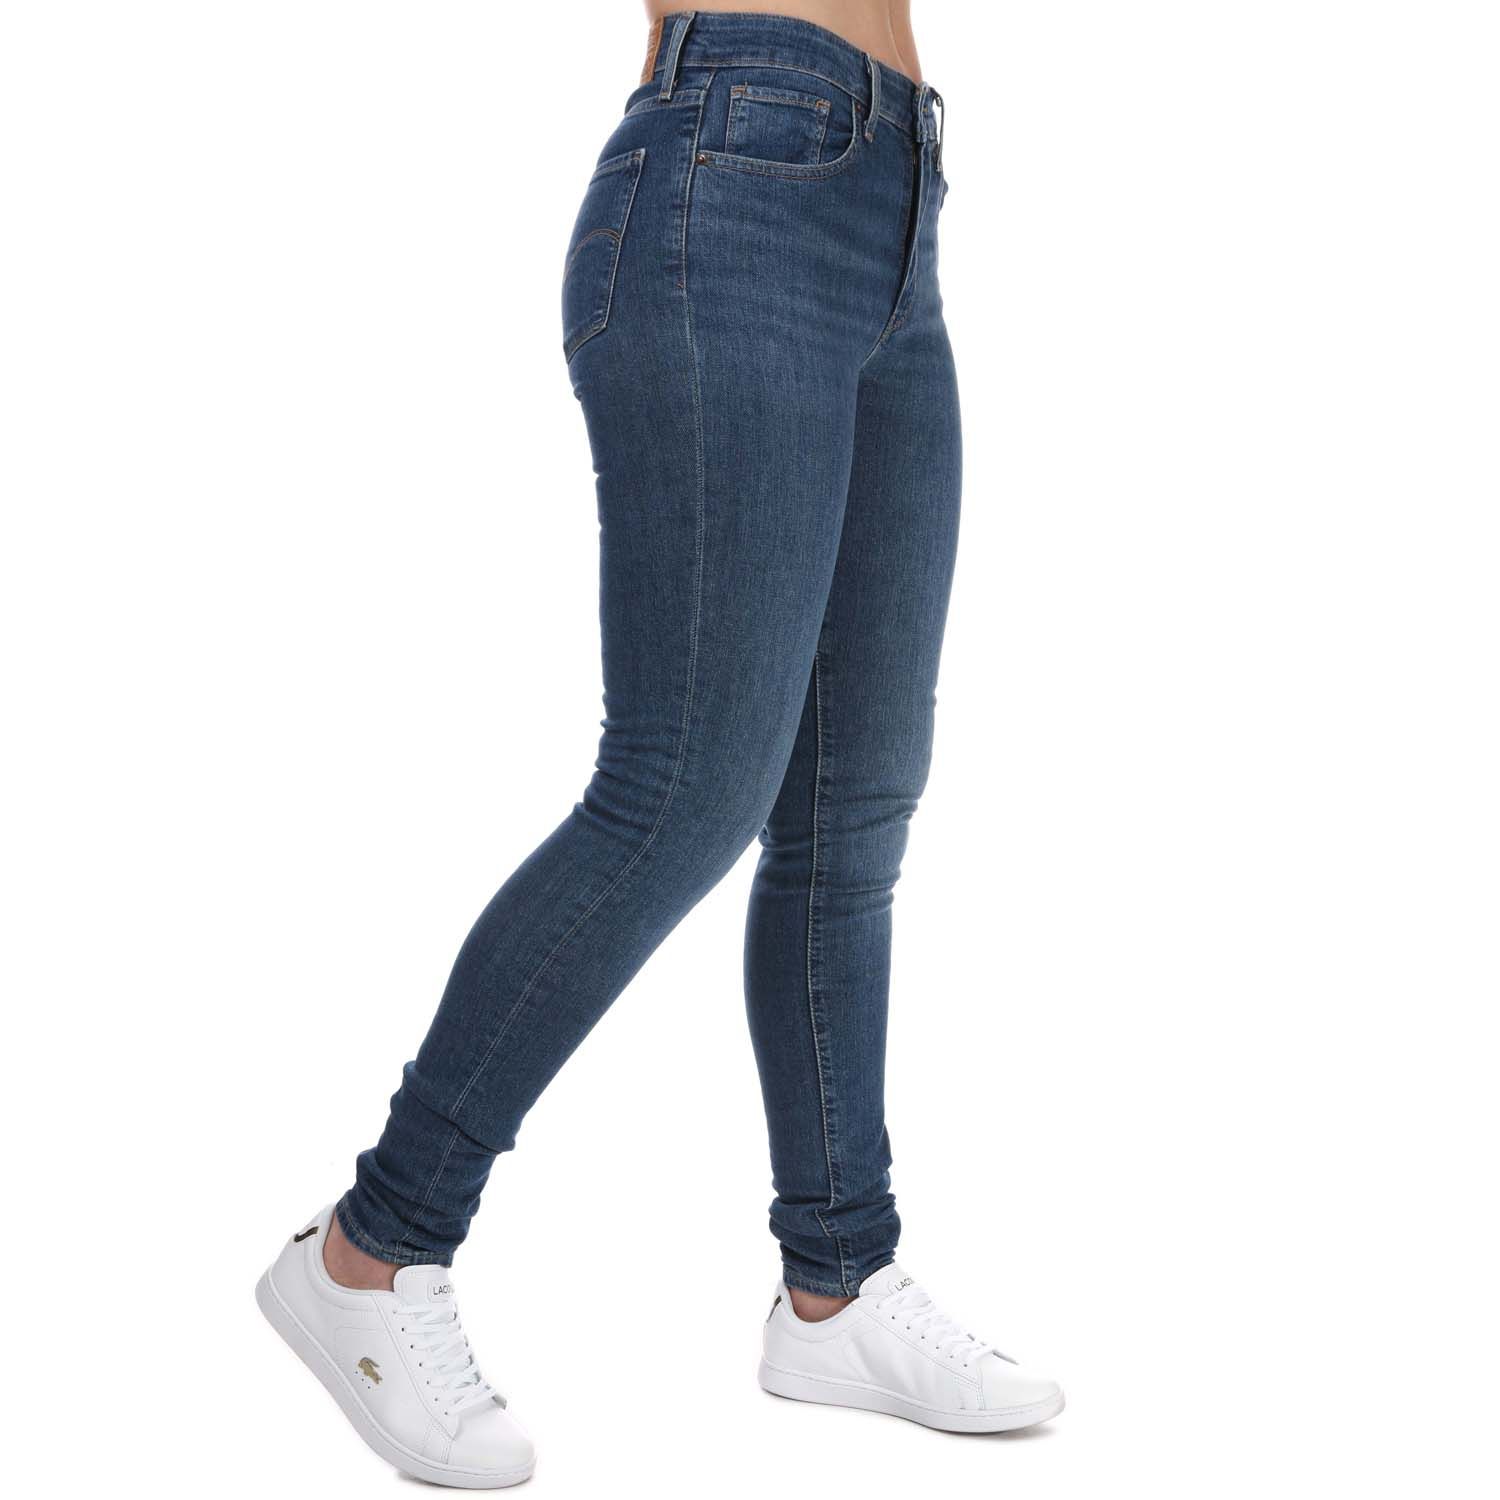 Denim Levis Womens 721 High Rise Skinny Jeans - Get The Label